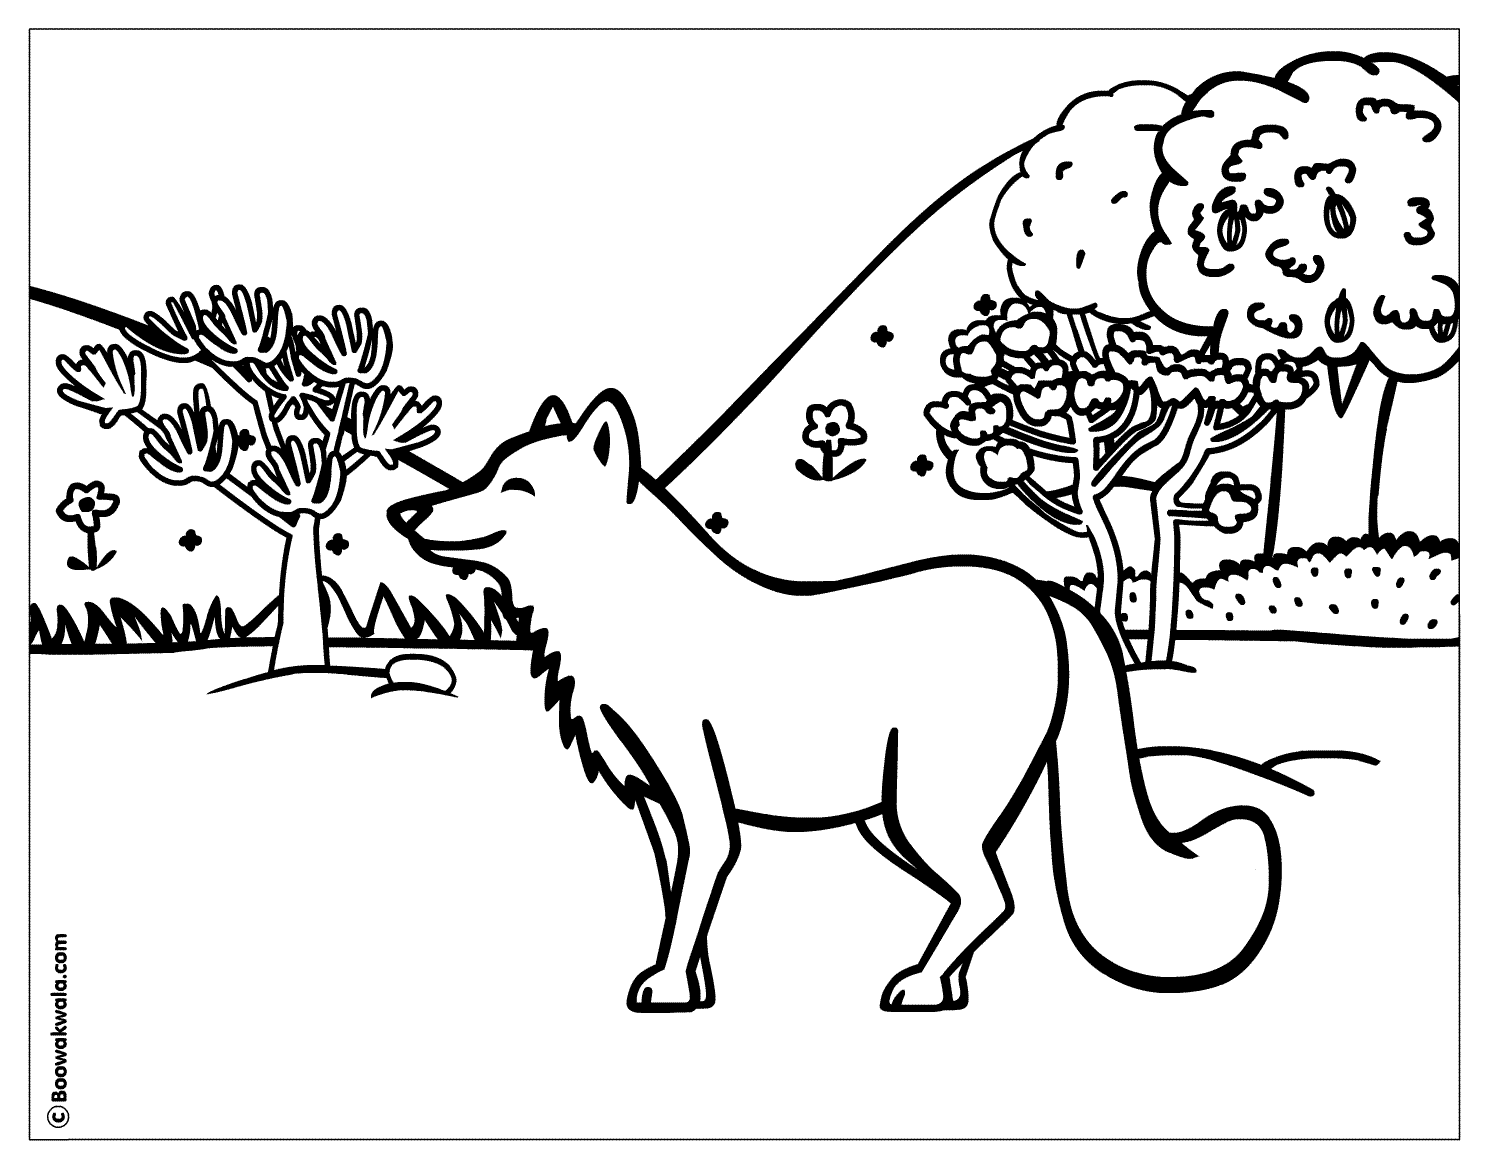 forest coloring sheets forest scene coloring page animal planet pinterest forest coloring sheets 